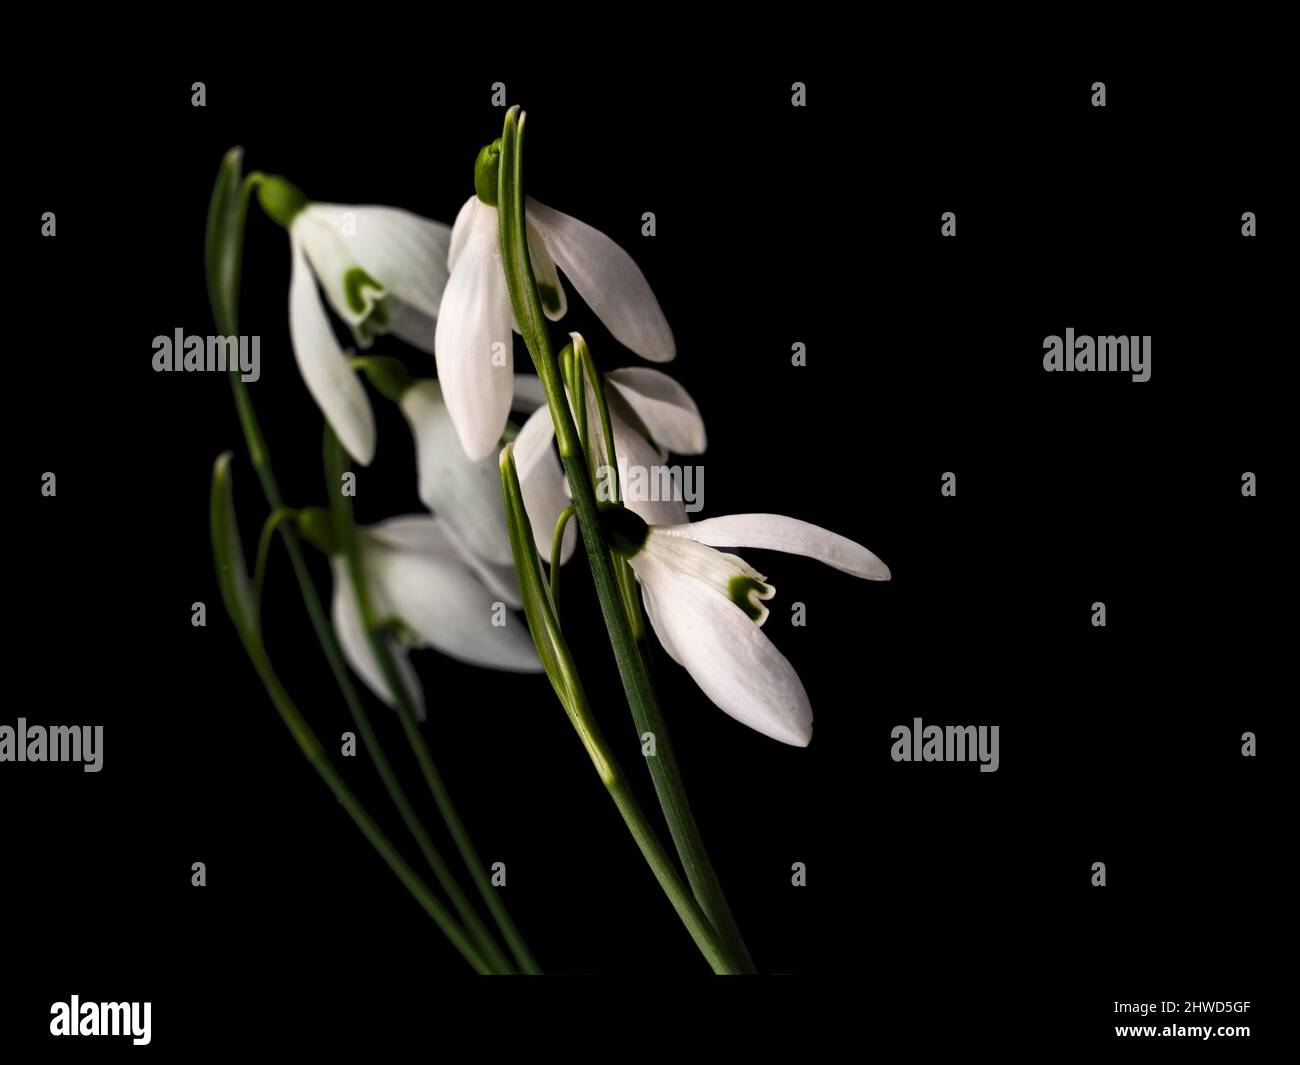 Three snowdrop flowers reflected on black background. Stock Photo